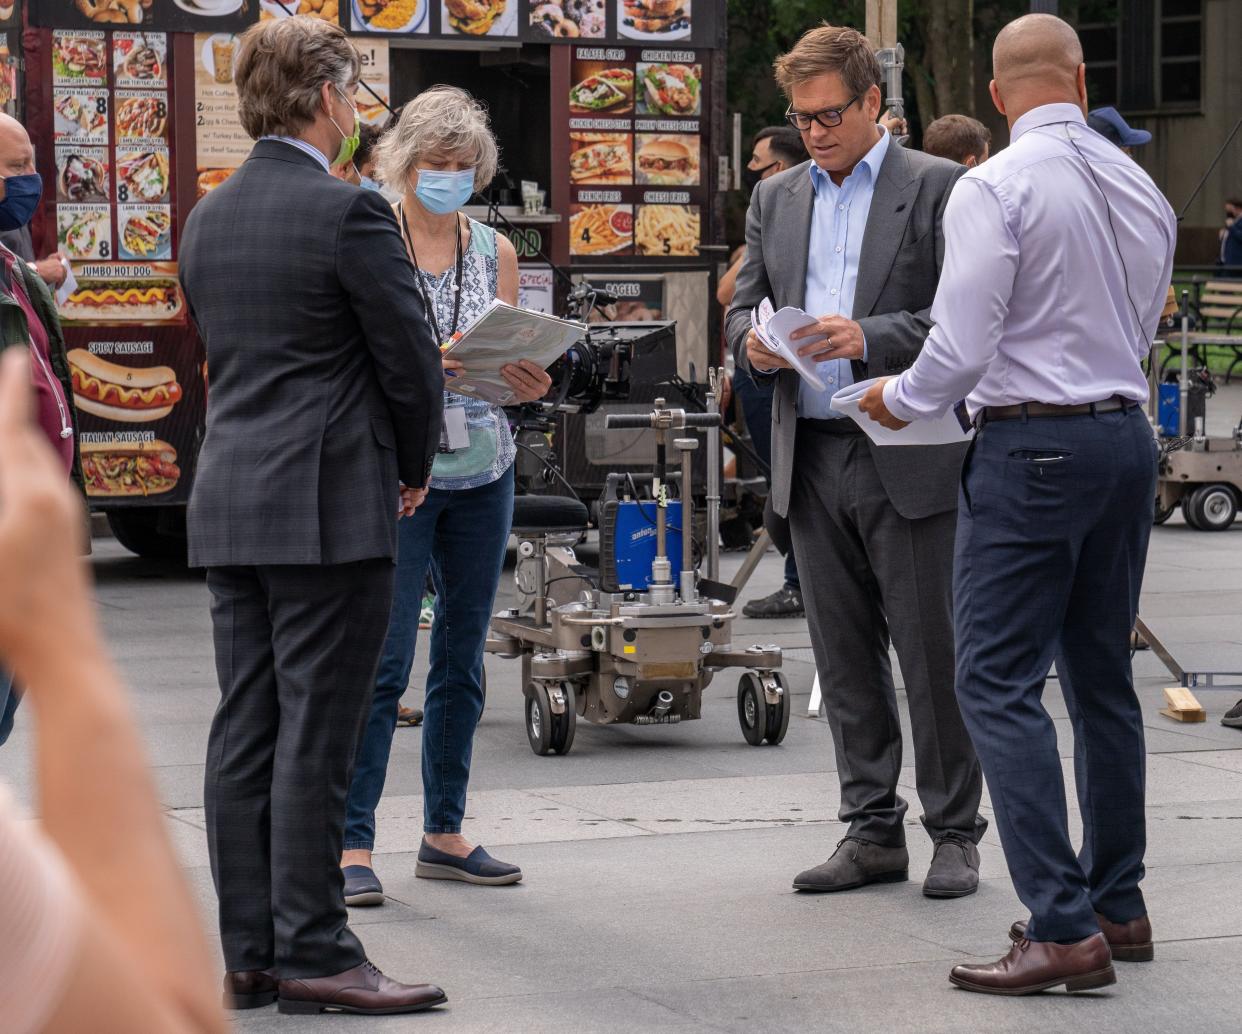 Michael Weatherly and Christopher Jackson spotted filming "Bull" in Brooklyn, New York City on Thursday, July 29, 2021.